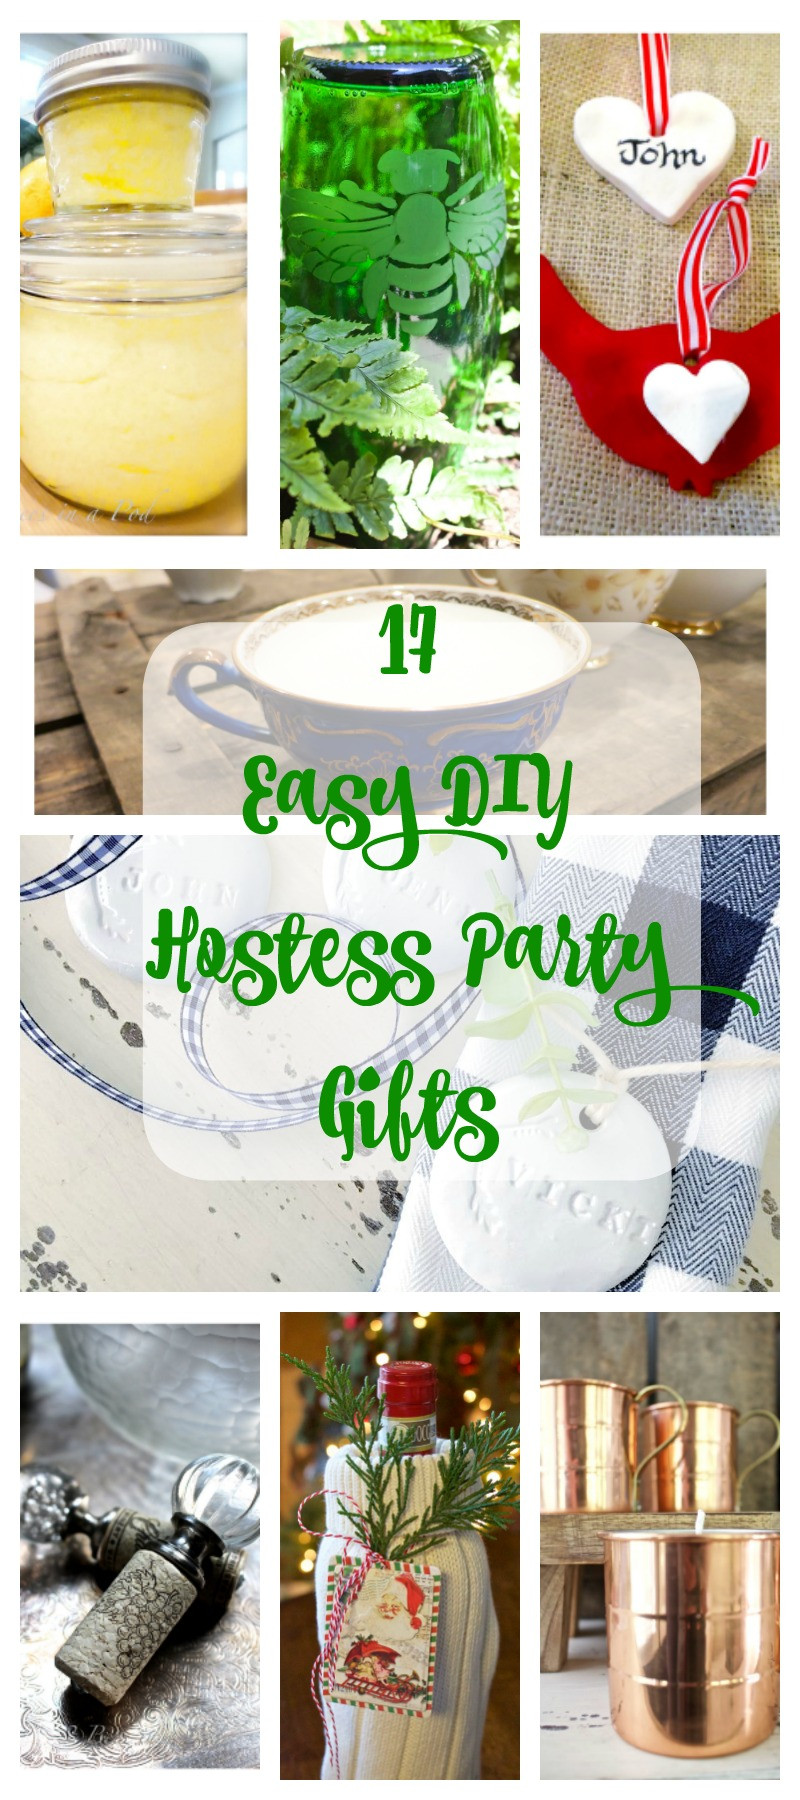 Holiday Party Gift Ideas For The Hostess
 17 Ideas for Easy DIY Holiday Hostess Gifts 2 Bees in a Pod